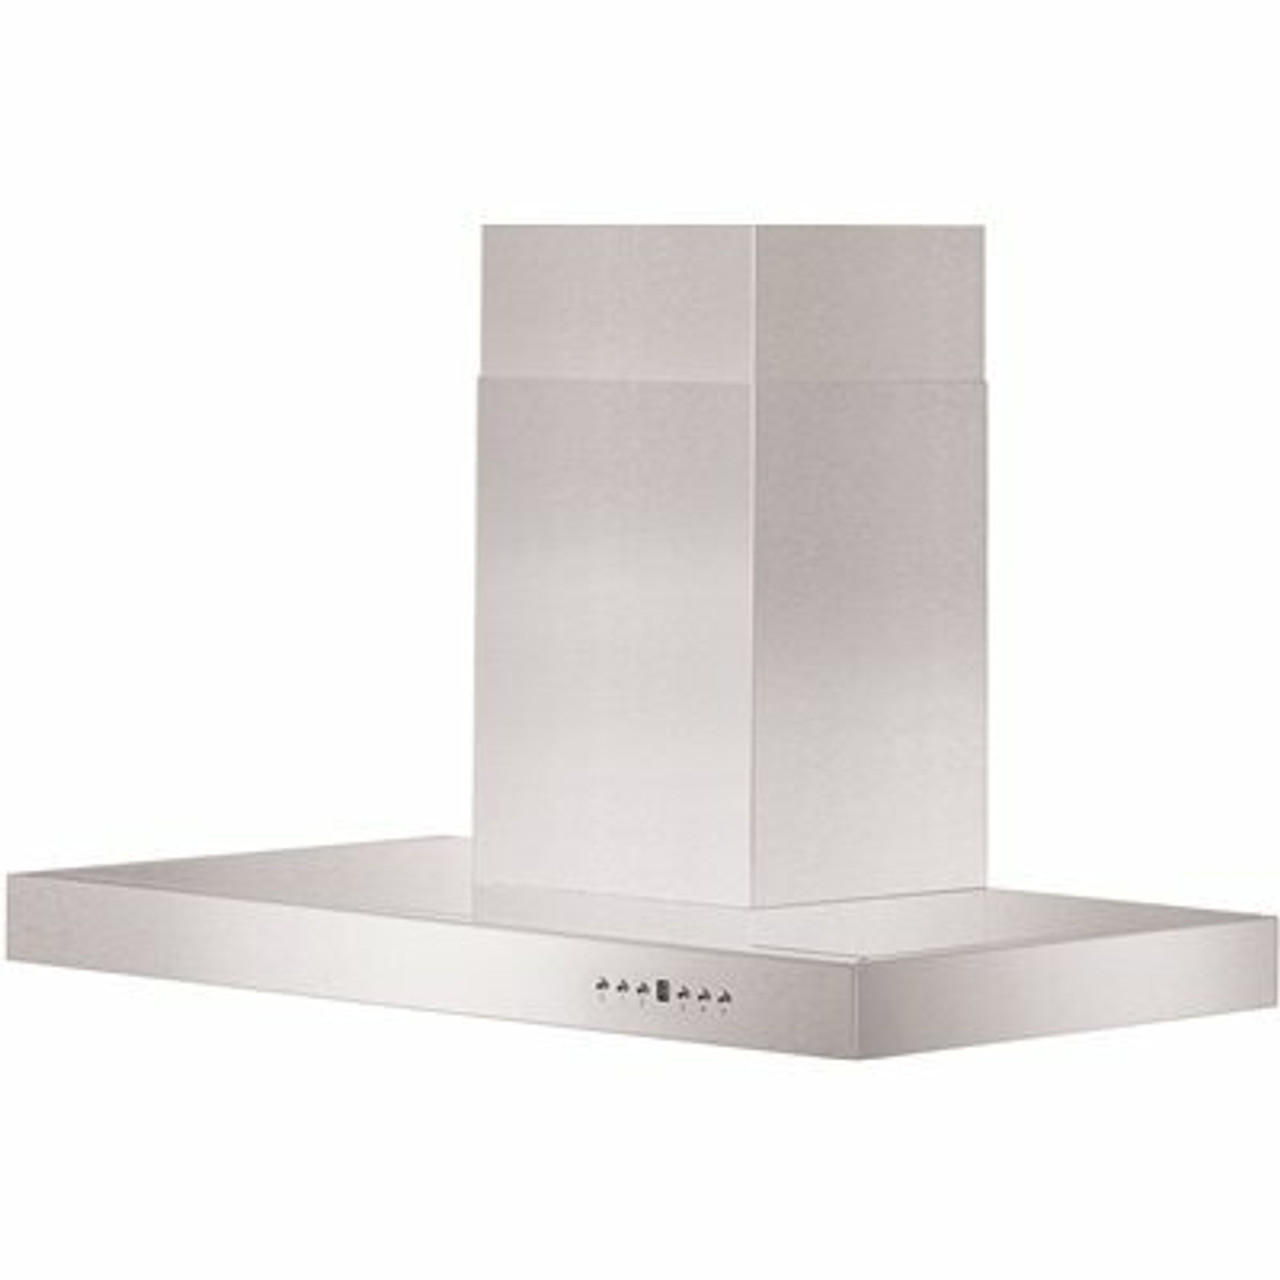 Zline Kitchen And Bath 48 In. Convertible Vent Wall Mount Range Hood In Stainless Steel - 206922072